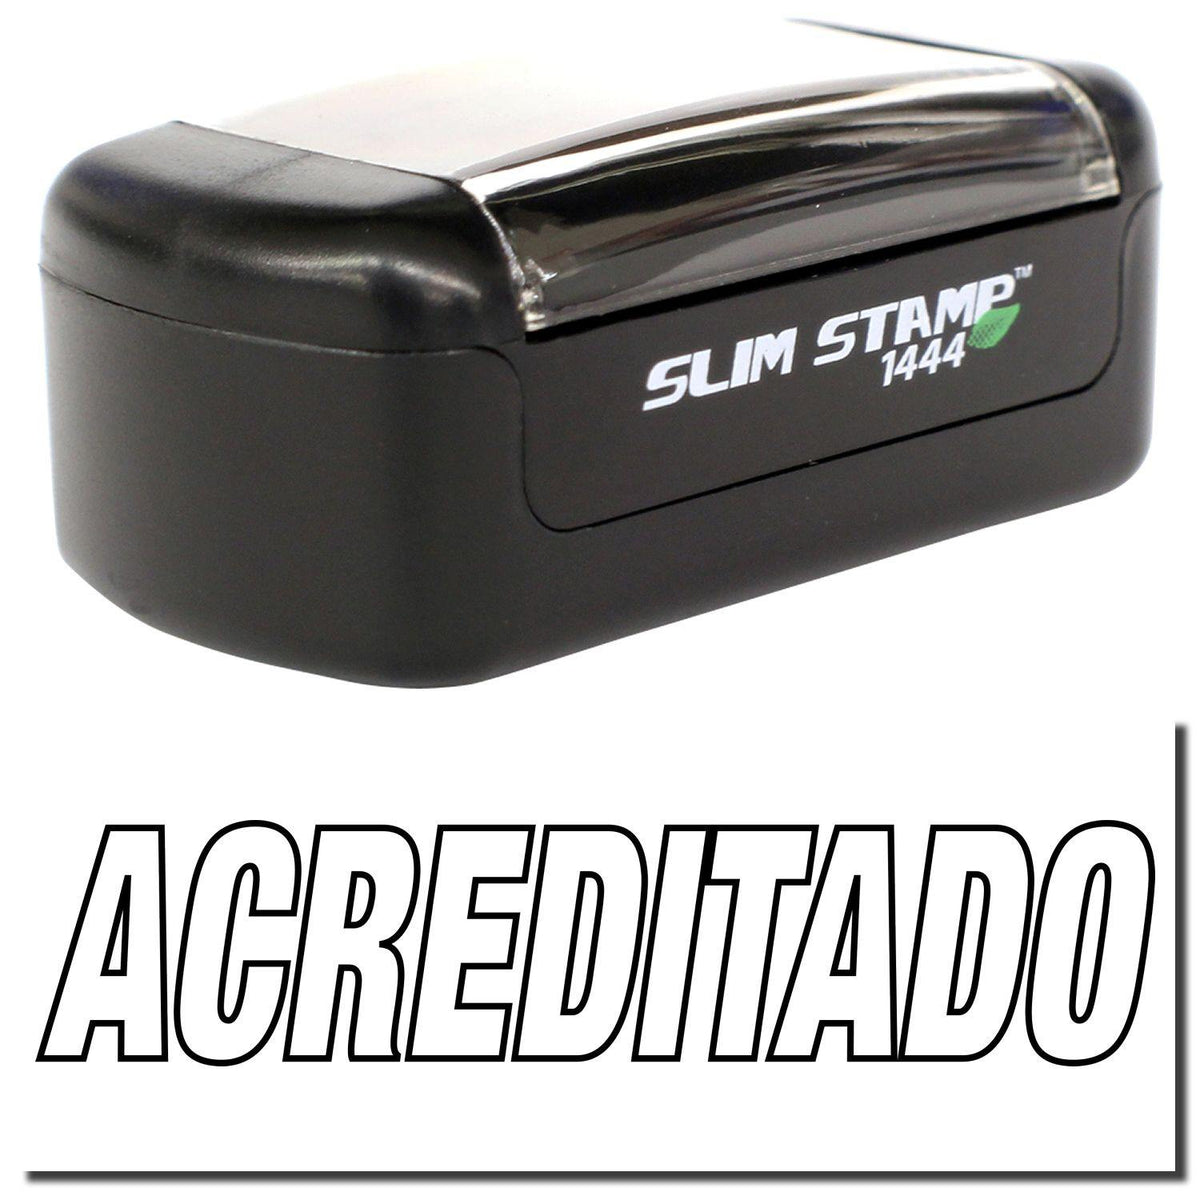 A stock office pre-inked stamp with a stamped image showing how the text &quot;ACREDITADO&quot; in an outline font is displayed after stamping.